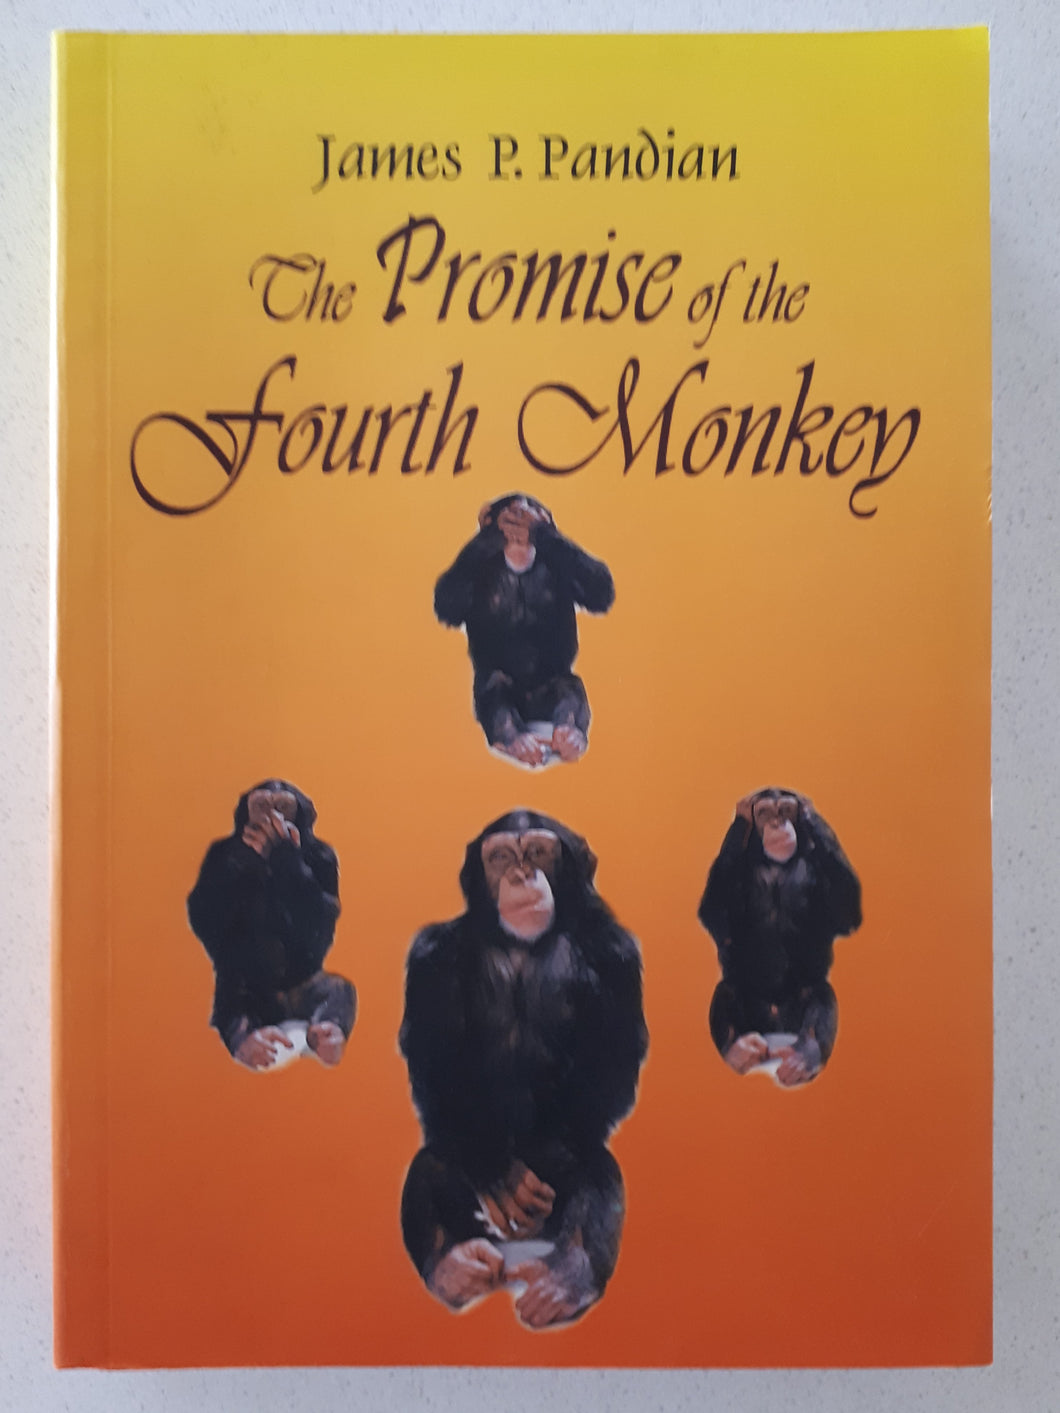 The Promise of the Fourth Monkey by James P. Pandian